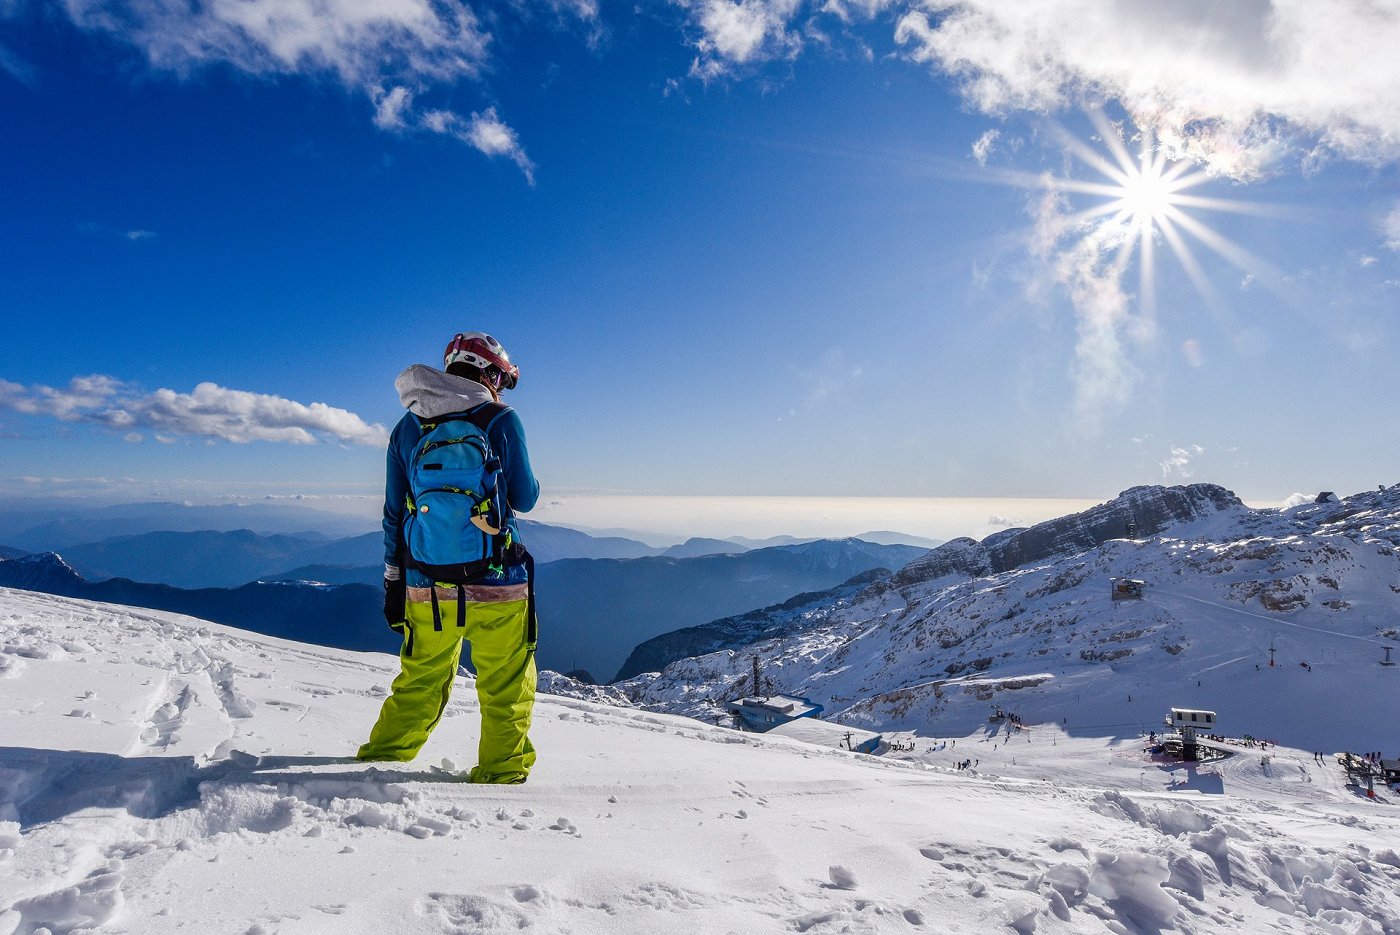 The skier enjoys the views of the valley from the ski slope bathed in sunshine.